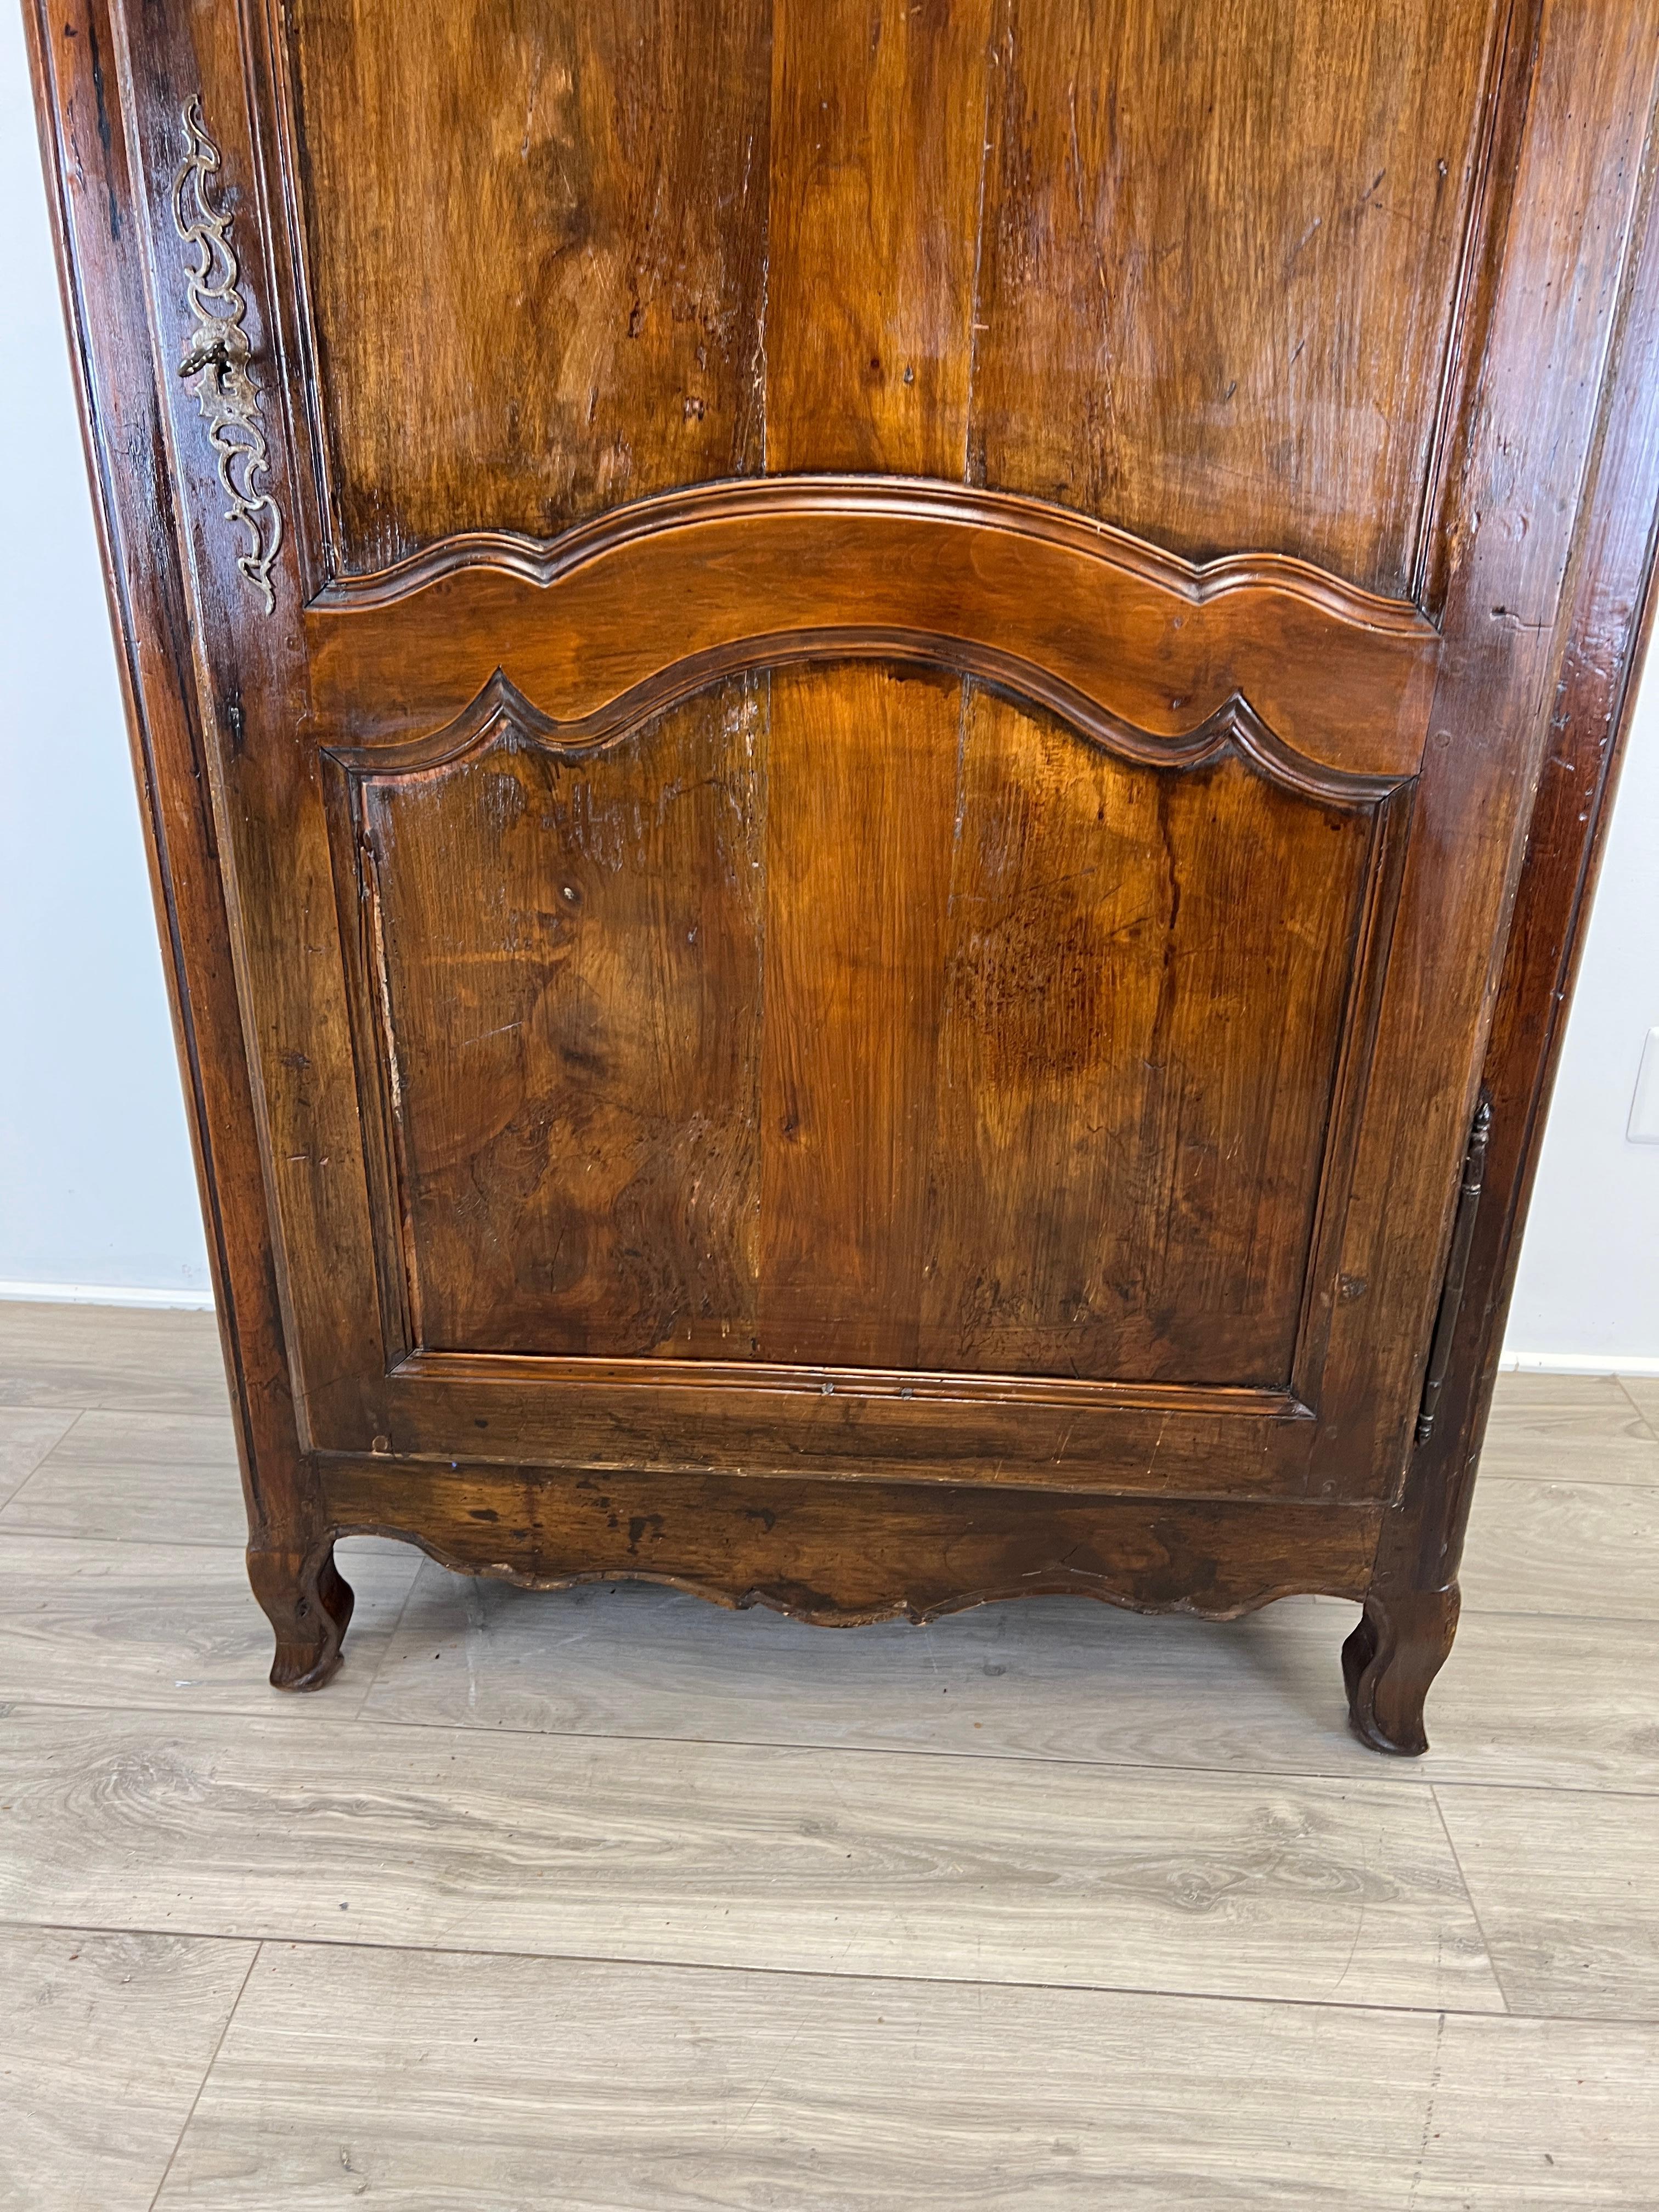 French Provincial 18th Century French Bonnetiere Armoire Cabinet